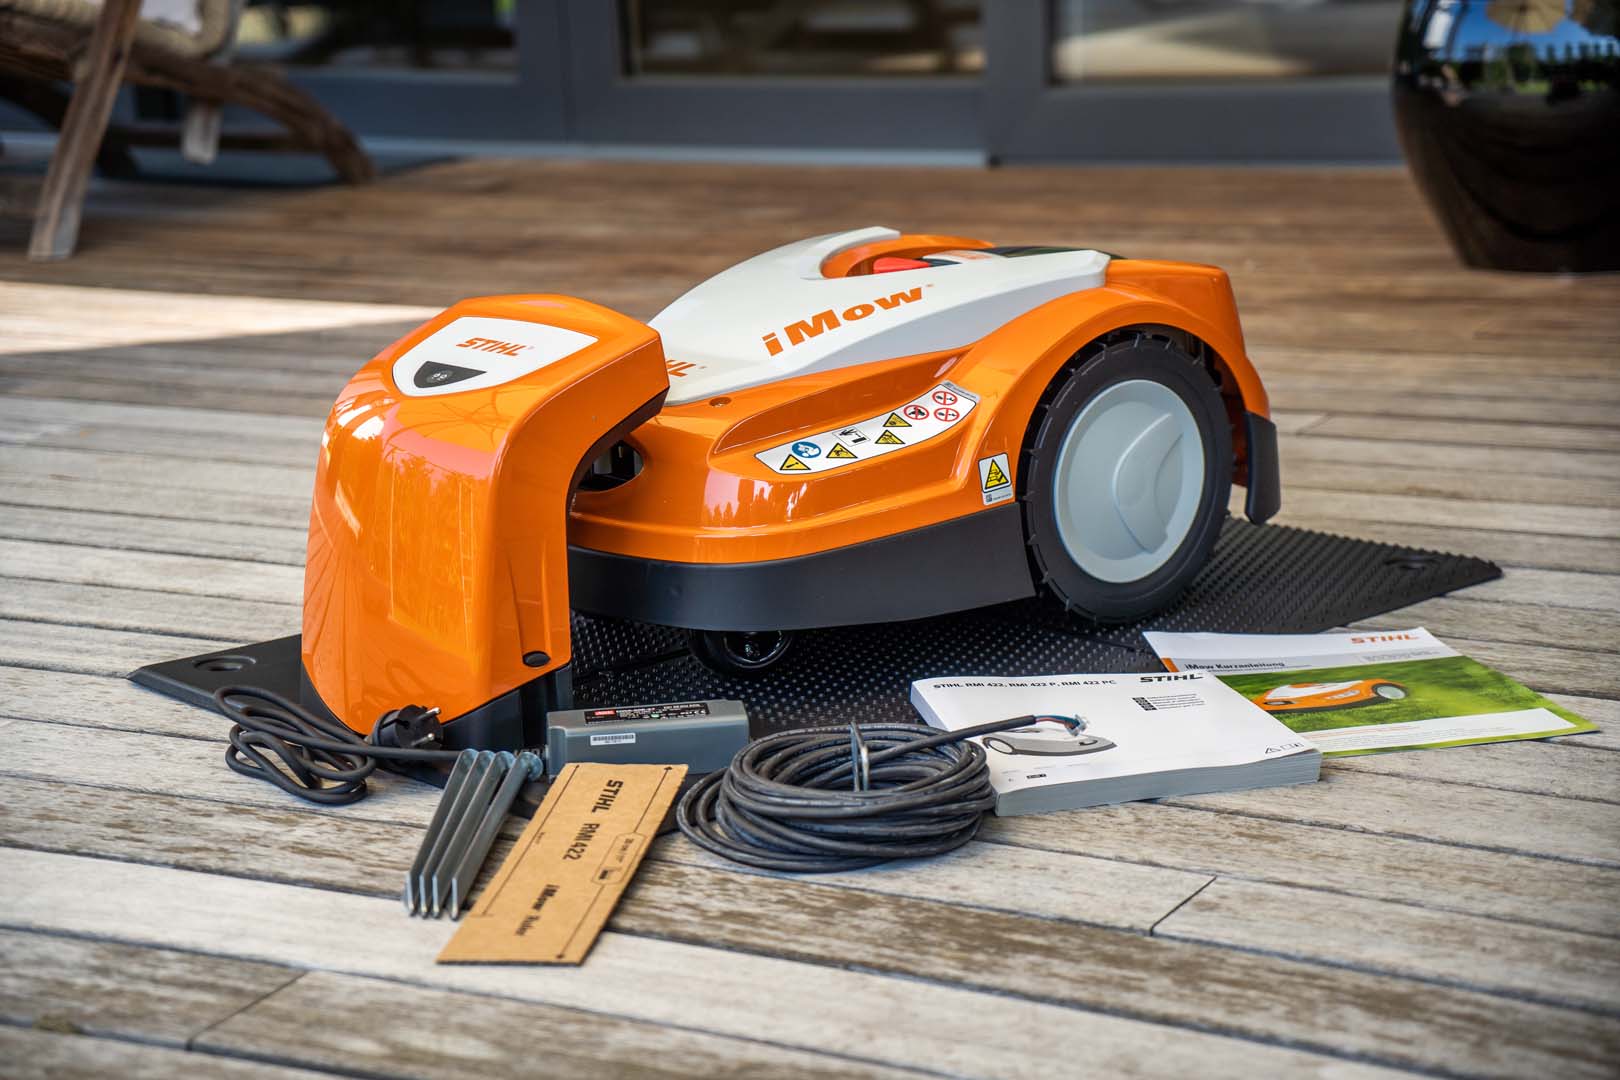 A STIHL iMOW® 422 robot mower on decking with cable and operating instructions